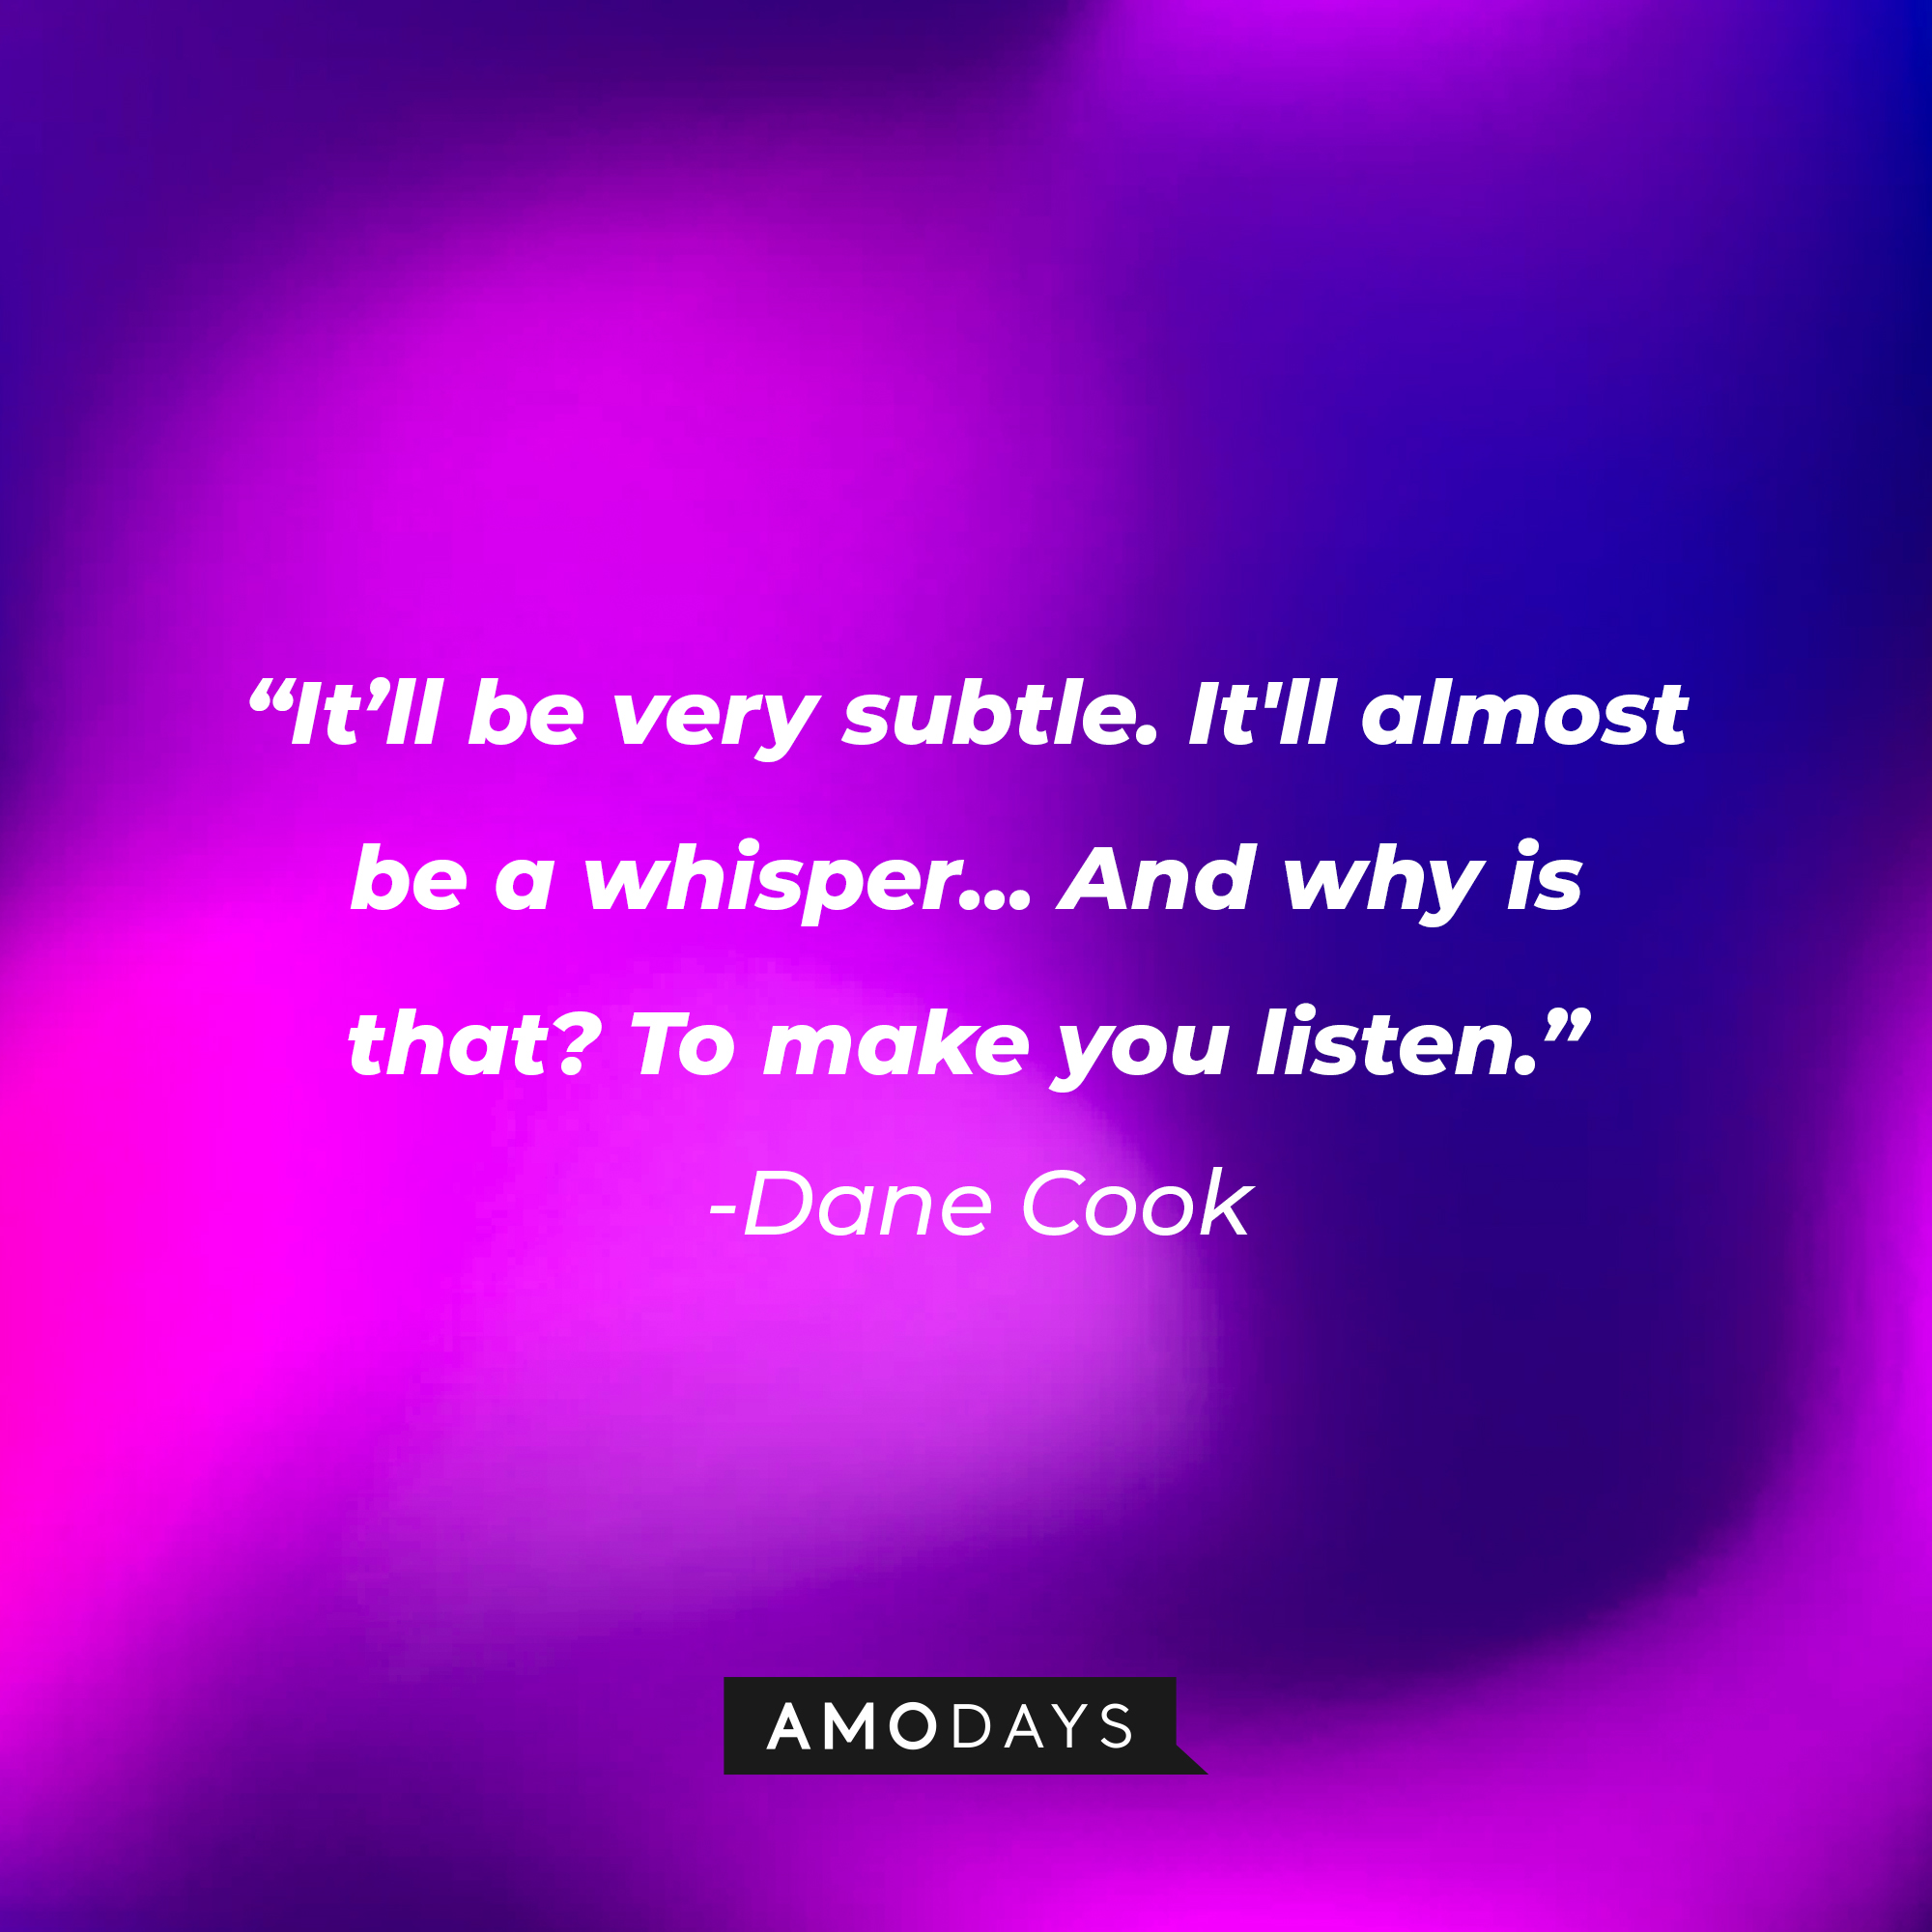 Dane Cook's quote: “It’ll be very subtle. It'll almost be a whisper... And why is that? To make you listen.” | Source: Amodays